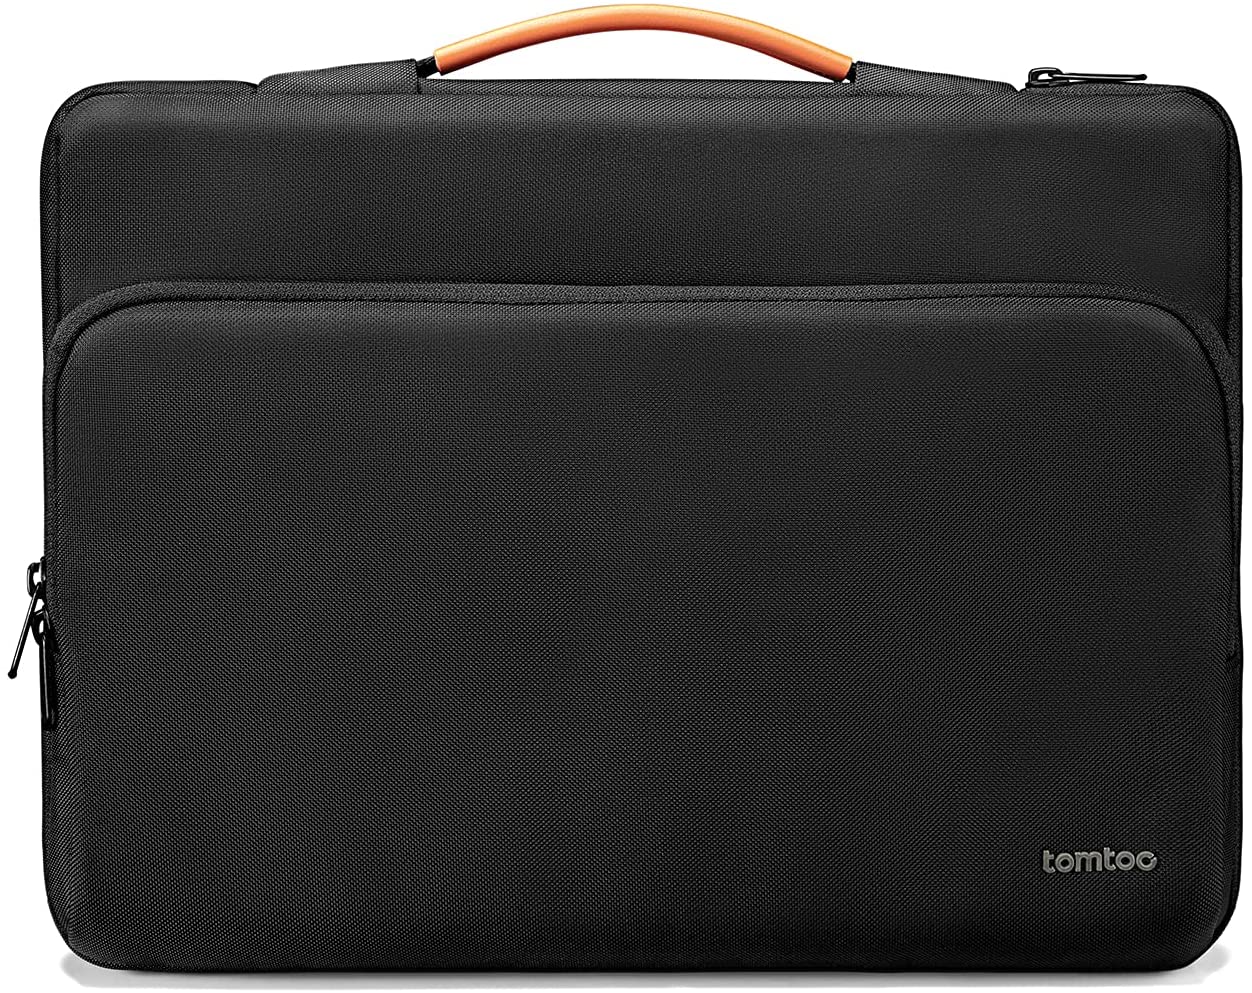 tomtoc Laptop Carrying Case for 13-inch MacBook Air M1/A2337 2018-2021. - e4cents